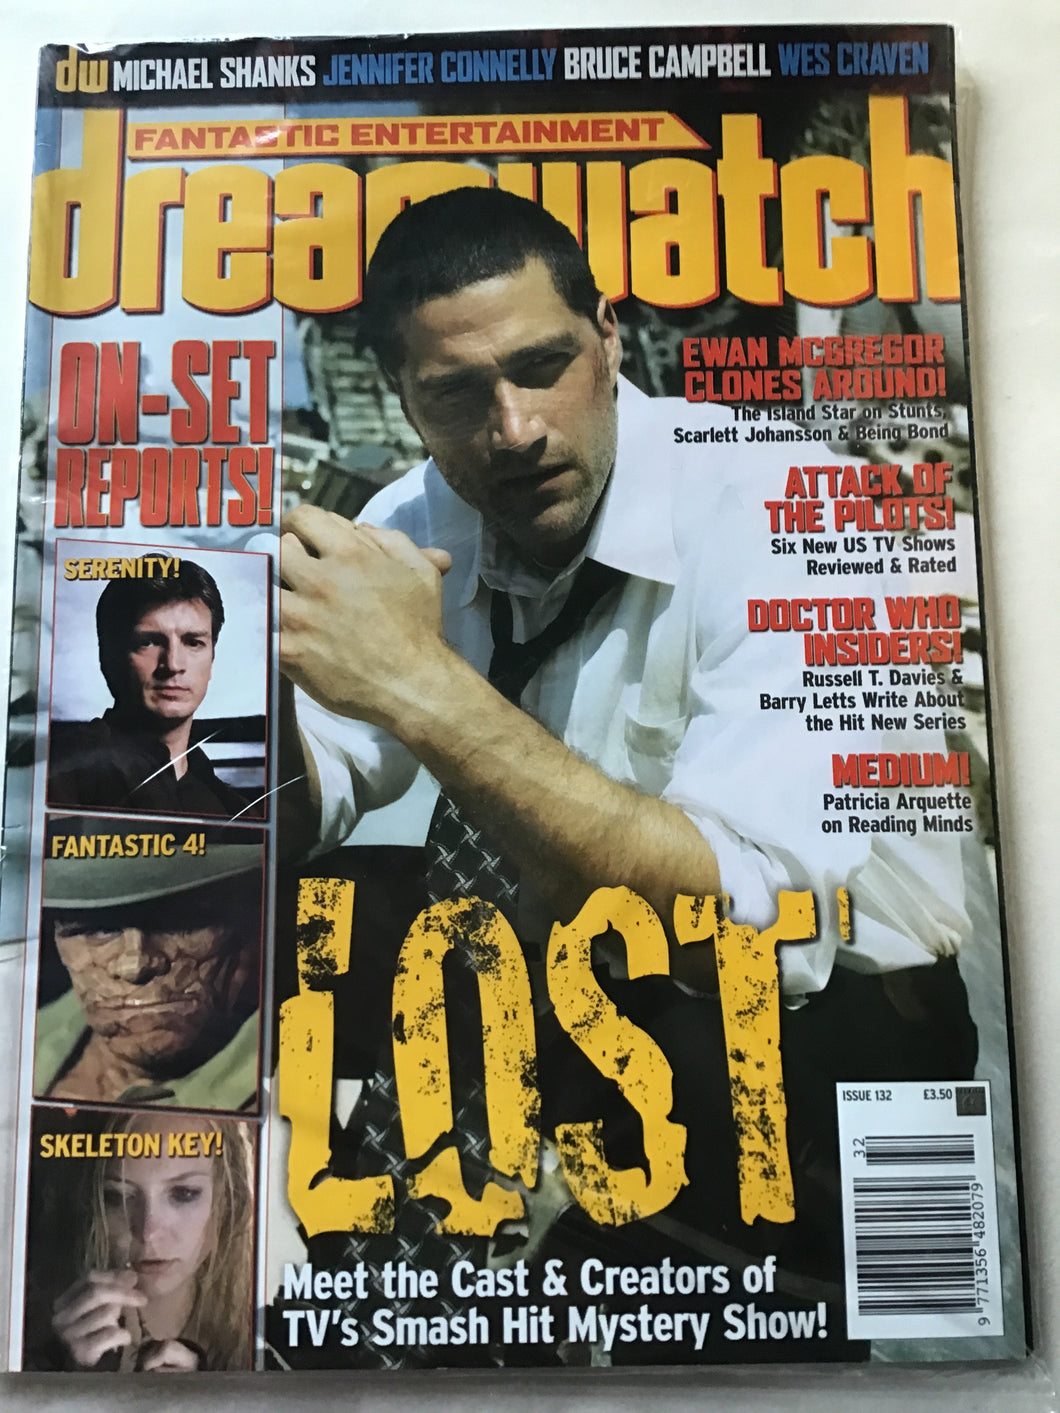 Dream watch magazine September 2005 issue 132 serenity fantastic four skeleton key lost Doctor Who Star Wars